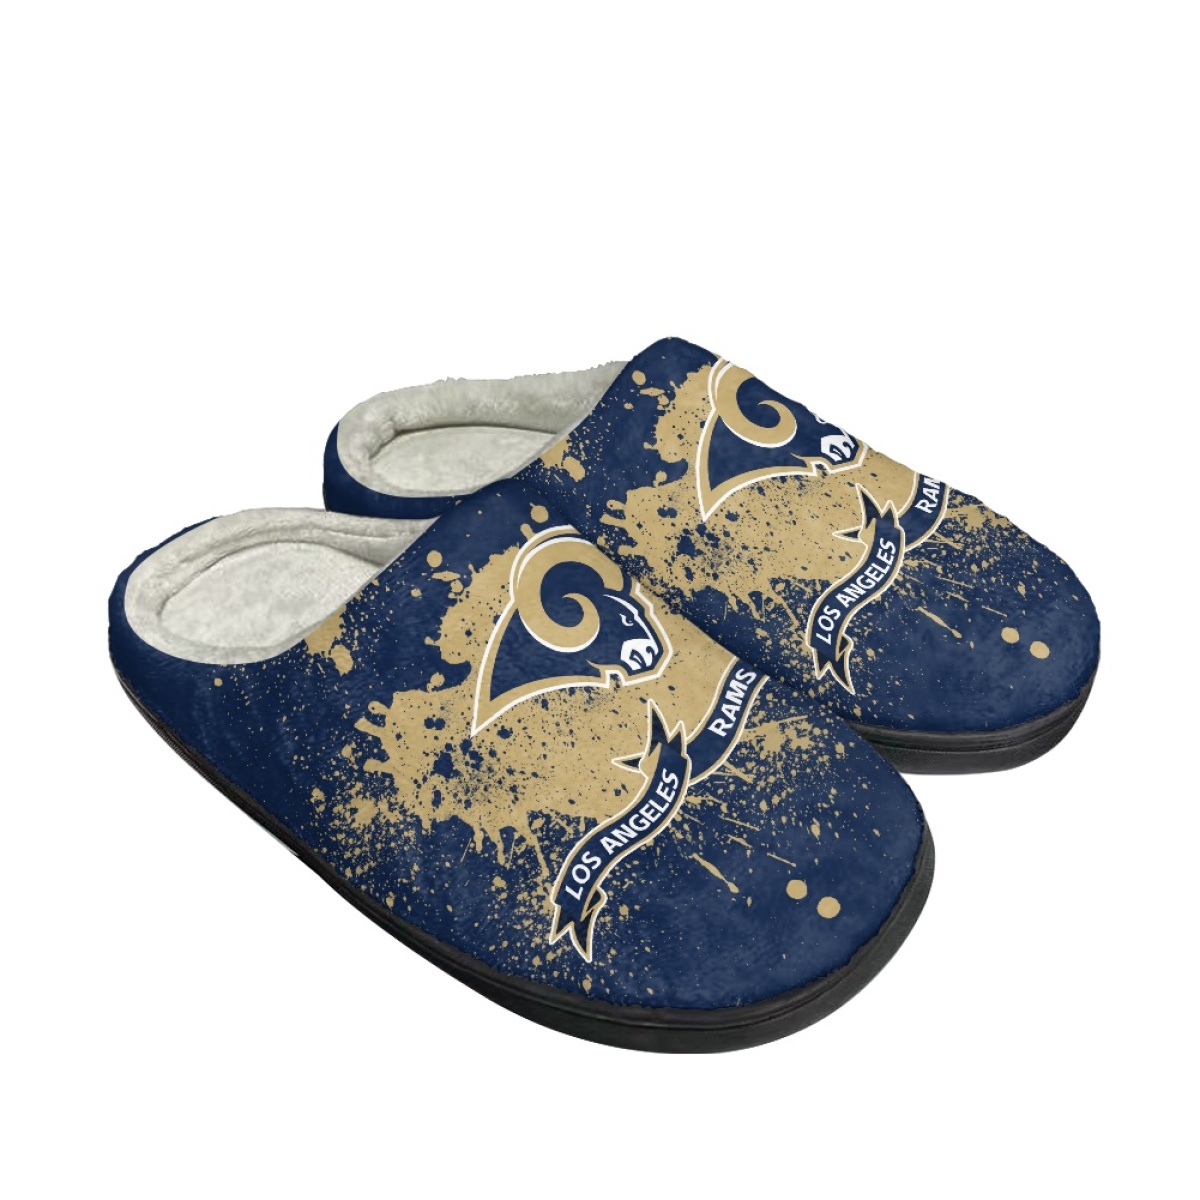 Men's Los Angeles Rams Slippers/Shoes 006